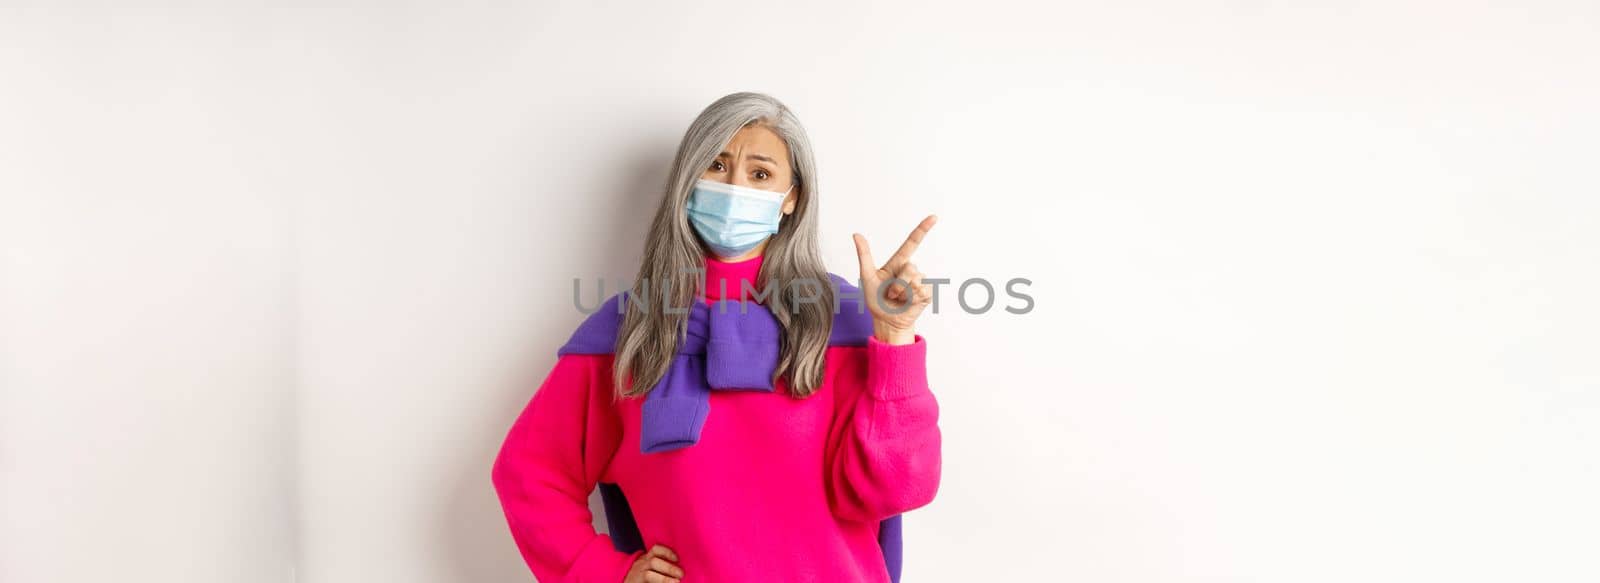 Covid-19, quarantine and lockdown concept. Skeptical asian elderly female in face mask looking disappointed, pointing at upper left corner, white background.